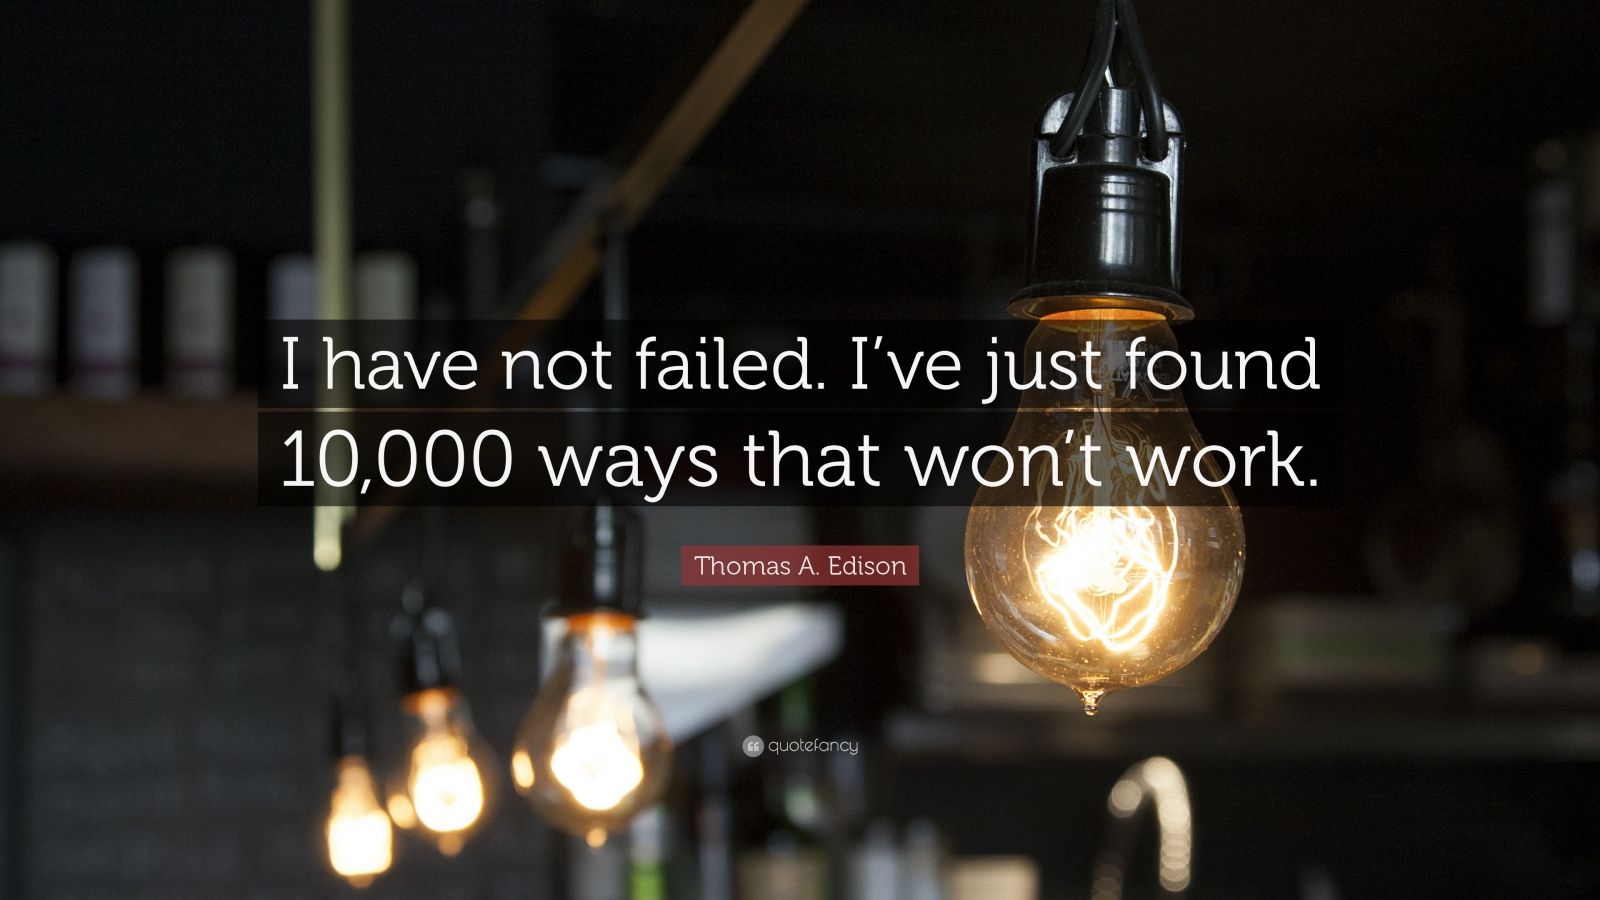 Thomas A. Edison Quotes (15 wallpapers) - Quotefancy